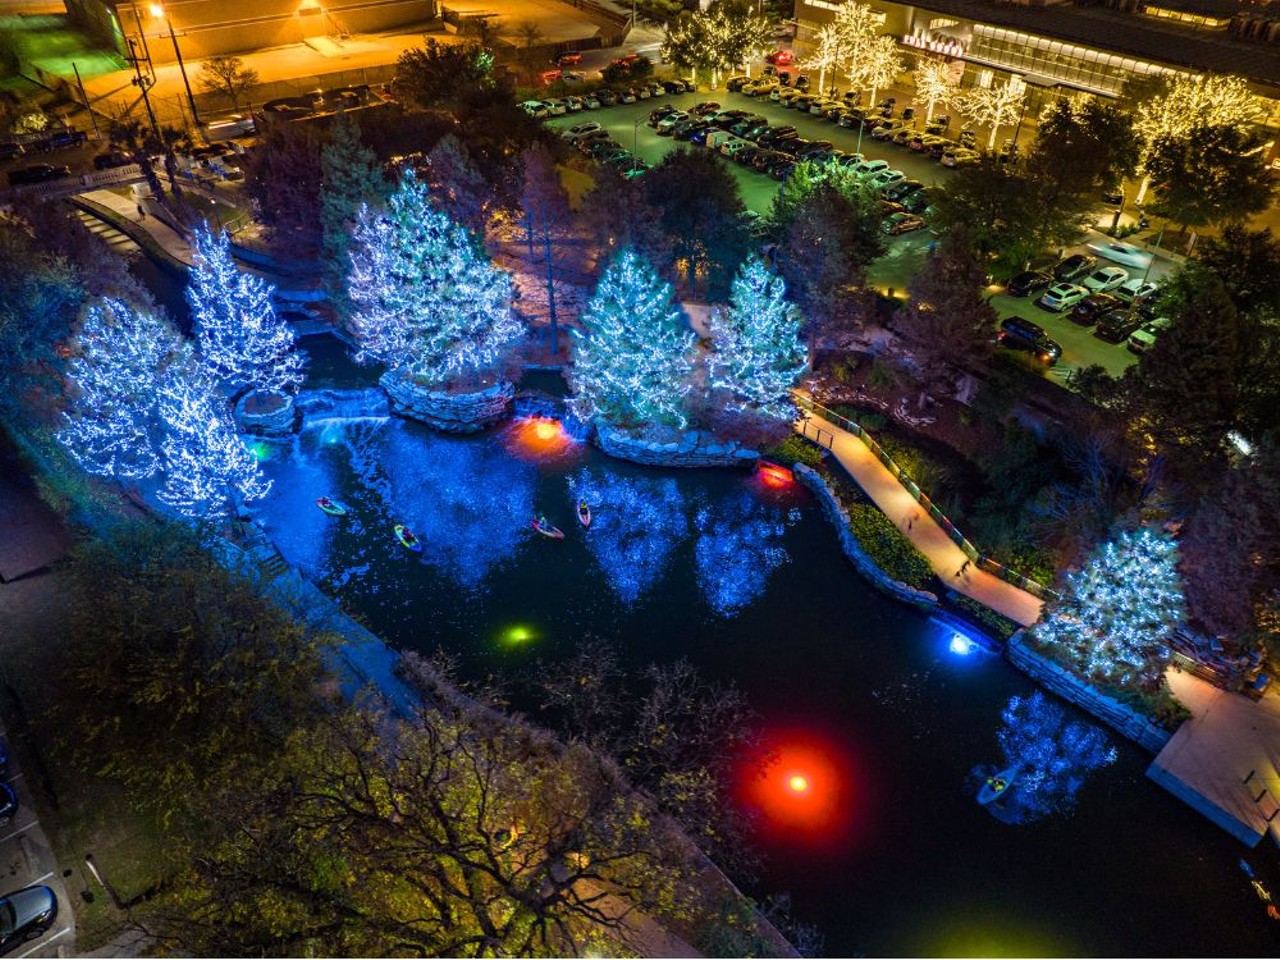 Museum Reach River of Lights
sariverauthority.org
It isn't just the downtown portion of the River Walk that gets the holiday treatment. The San Antonio River Authority's annual Museum Reach River of Lights extends the Christmas cheer further down the river. The holiday season kicks off on Dec. 2 with the annual Holly Jolly Kayaking event, followed by the River of Lights celebration on Dec. 9.